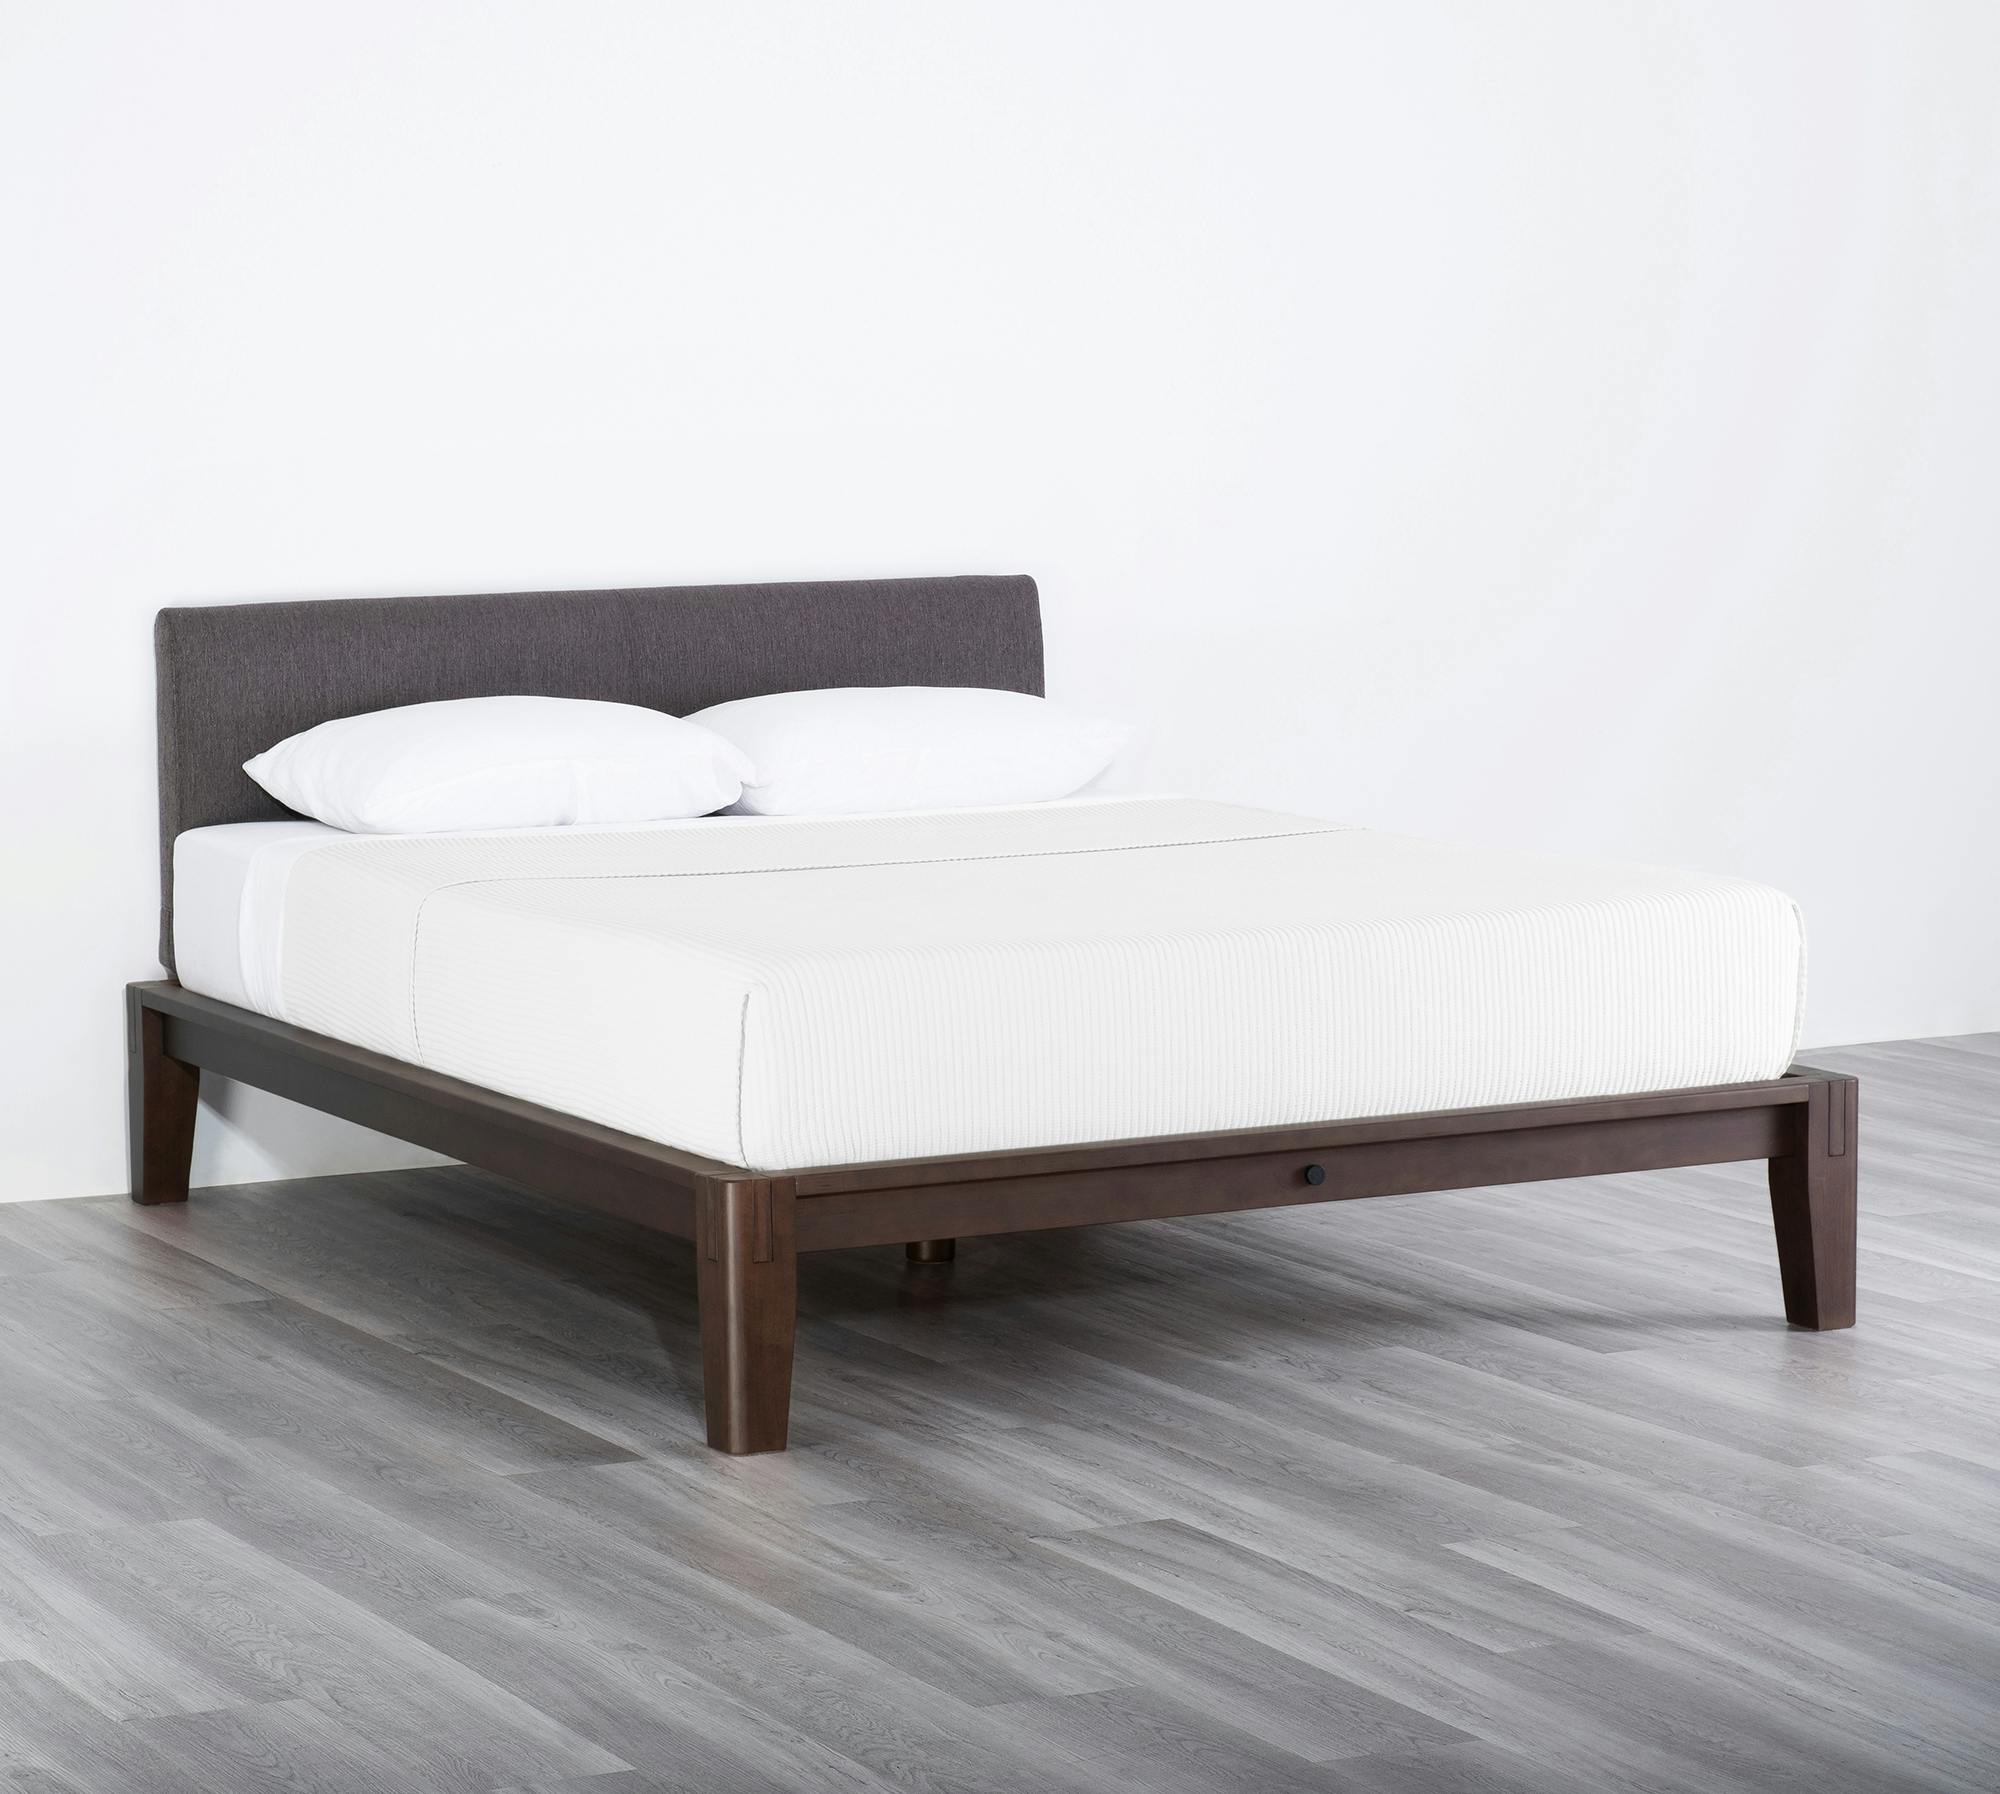 The Bed (Espresso / Dark Charcoal) Angled 